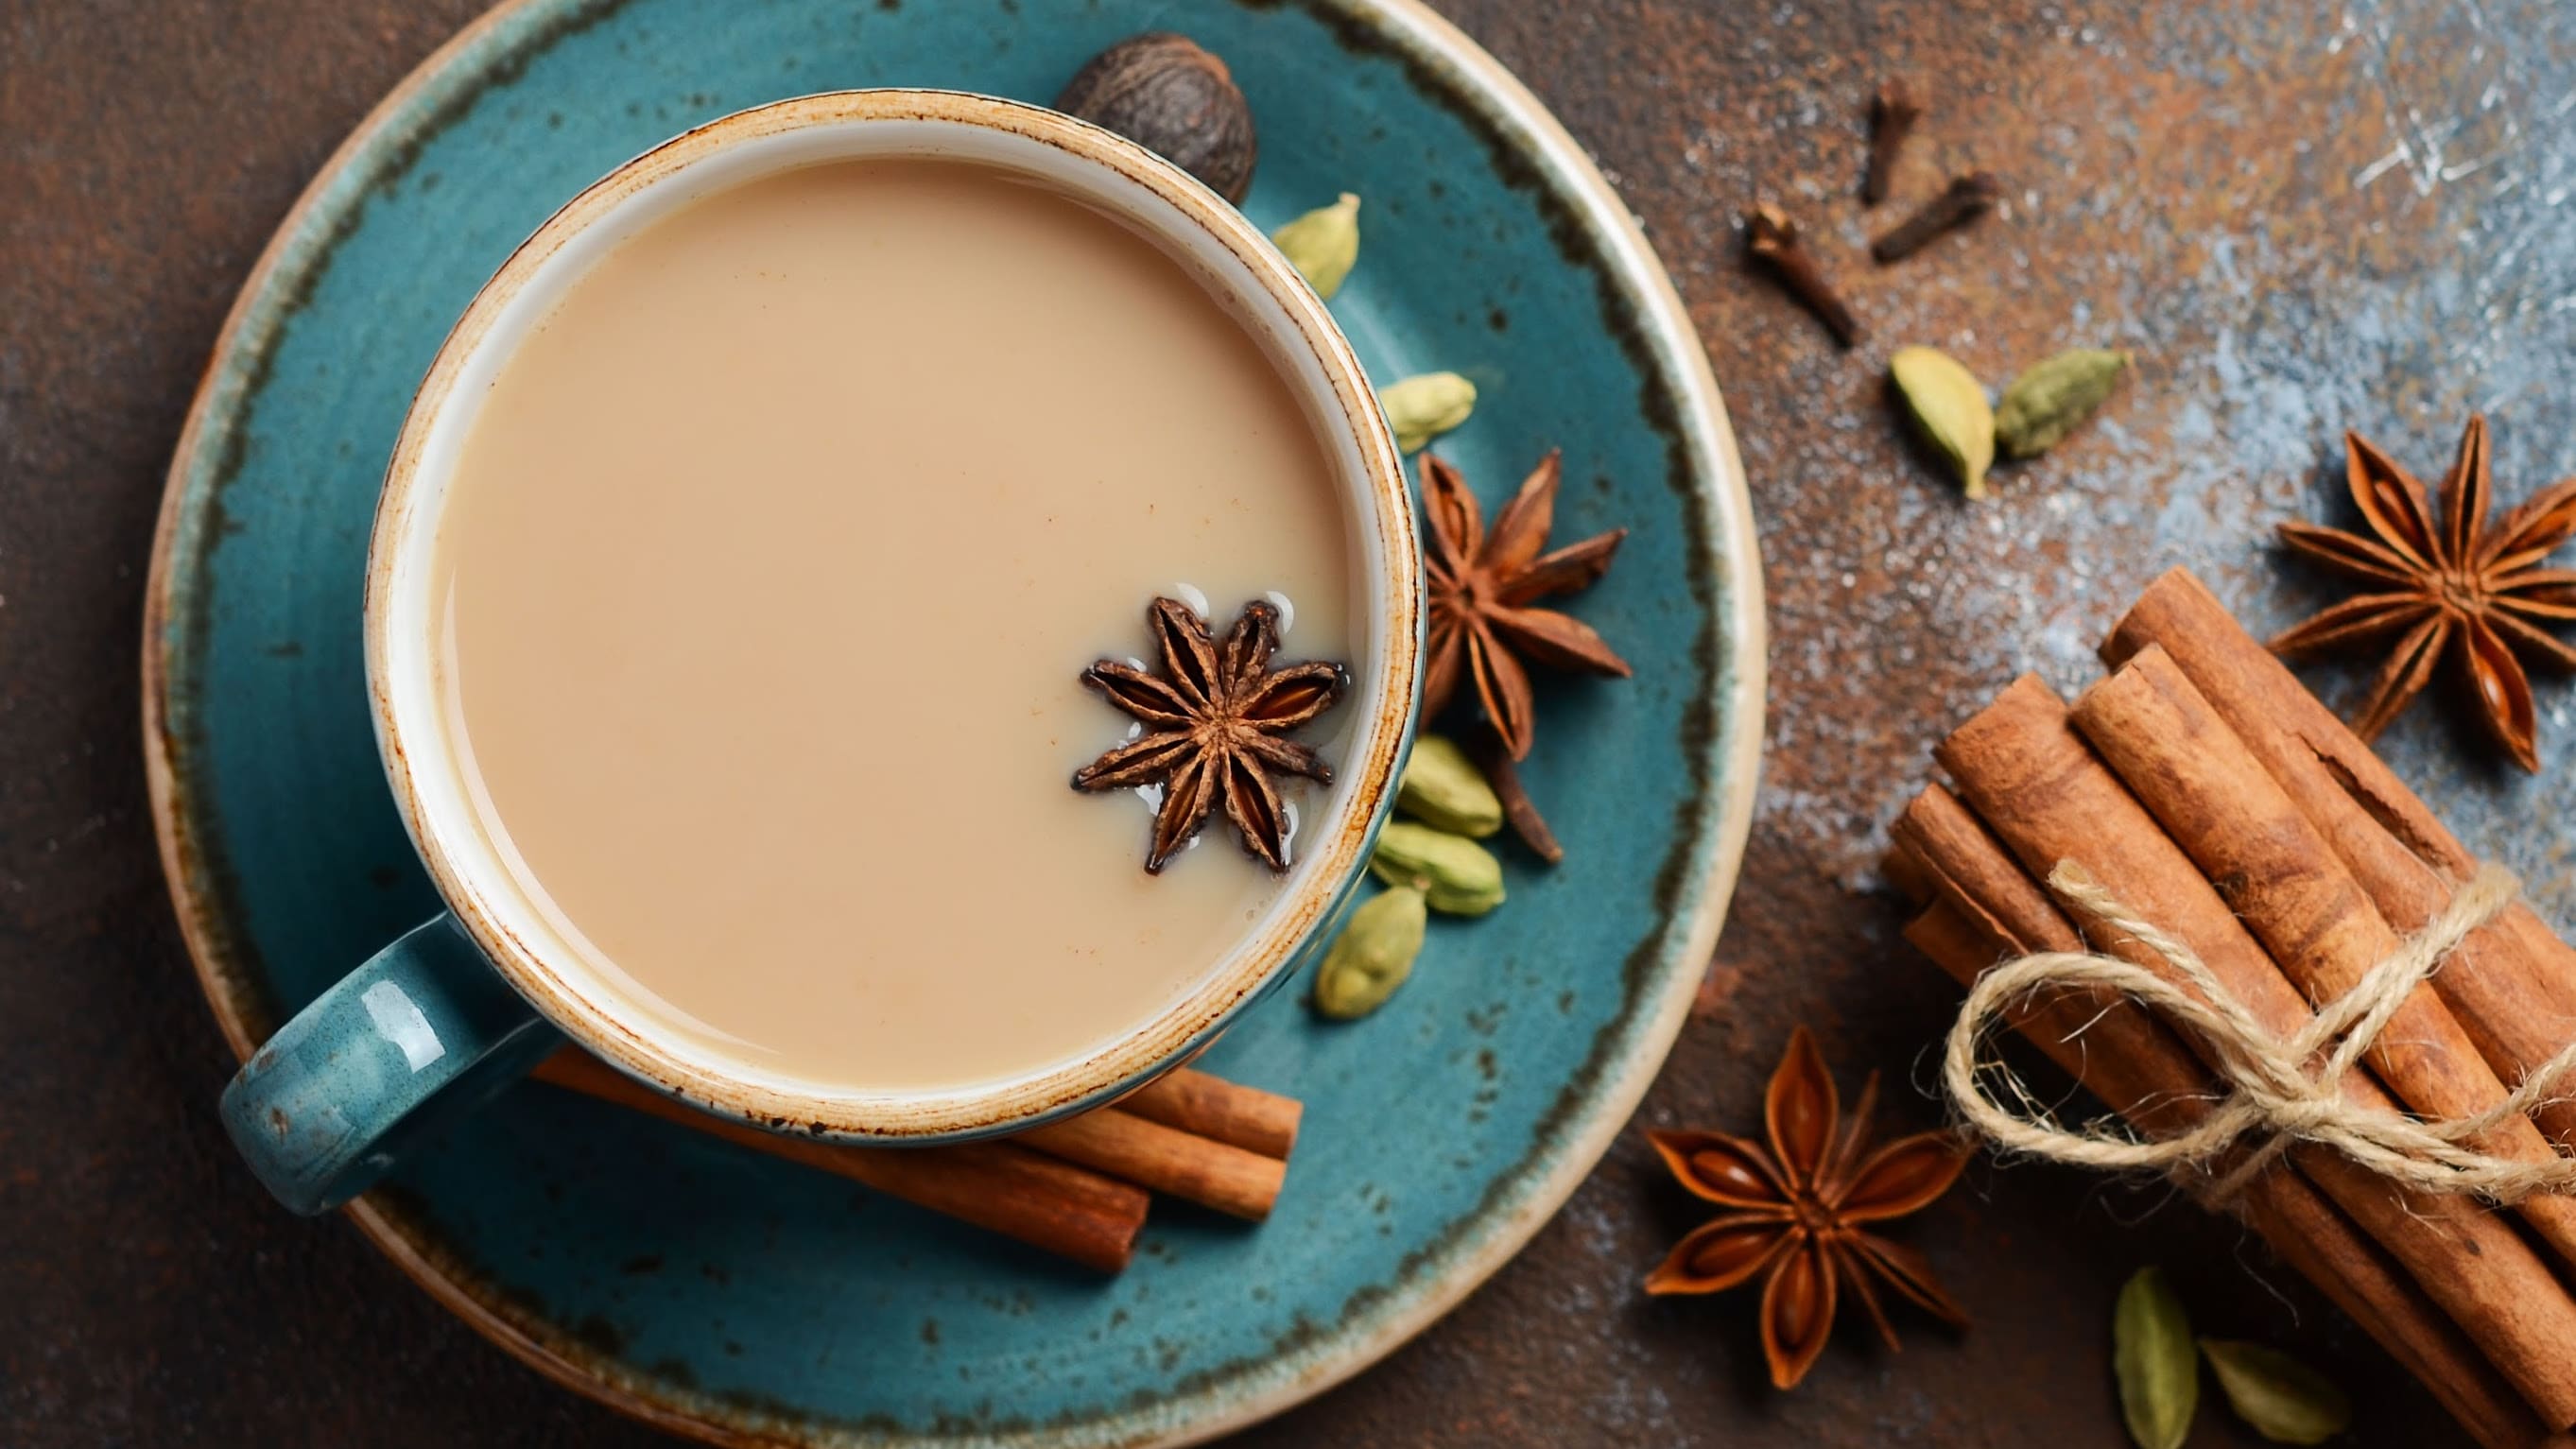 The Chai Formula That's Impossible to Mess Up